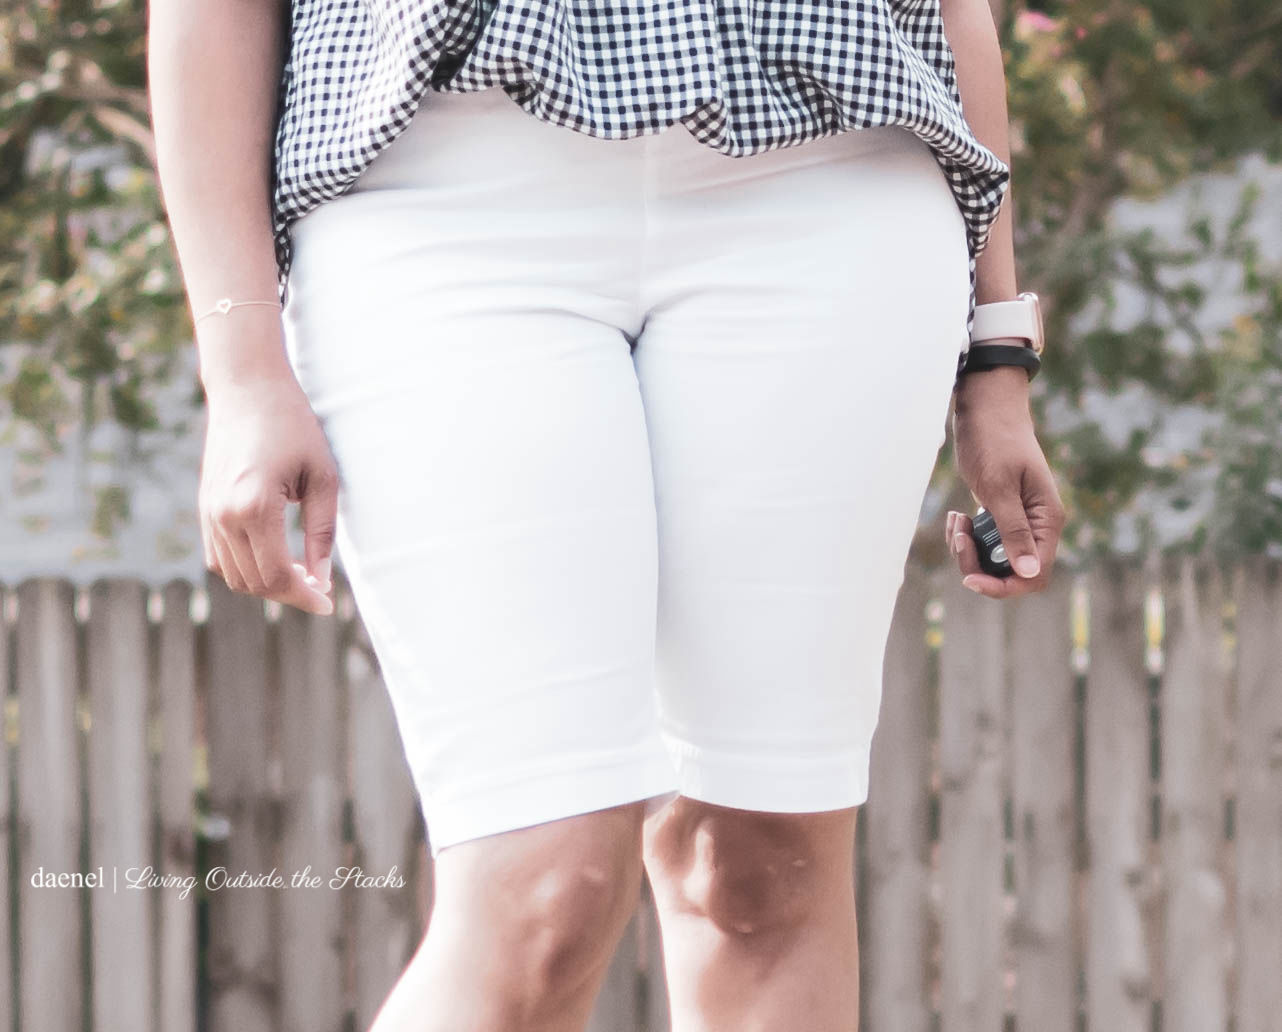 Gingham Top White Bermuda Shorts Shorts and Black Earth Sandals #AgelessStyle {living outside the stacks}